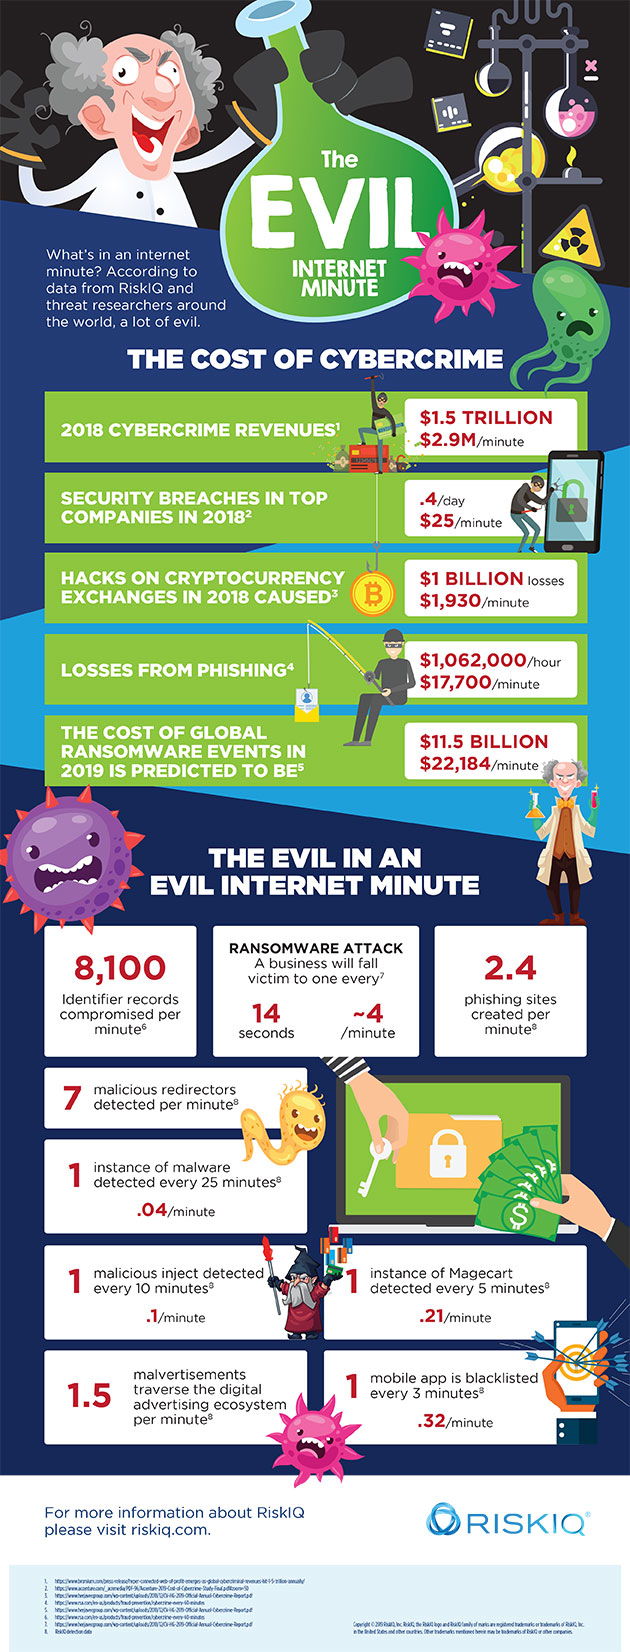 The Evil Internet Minute Infographic